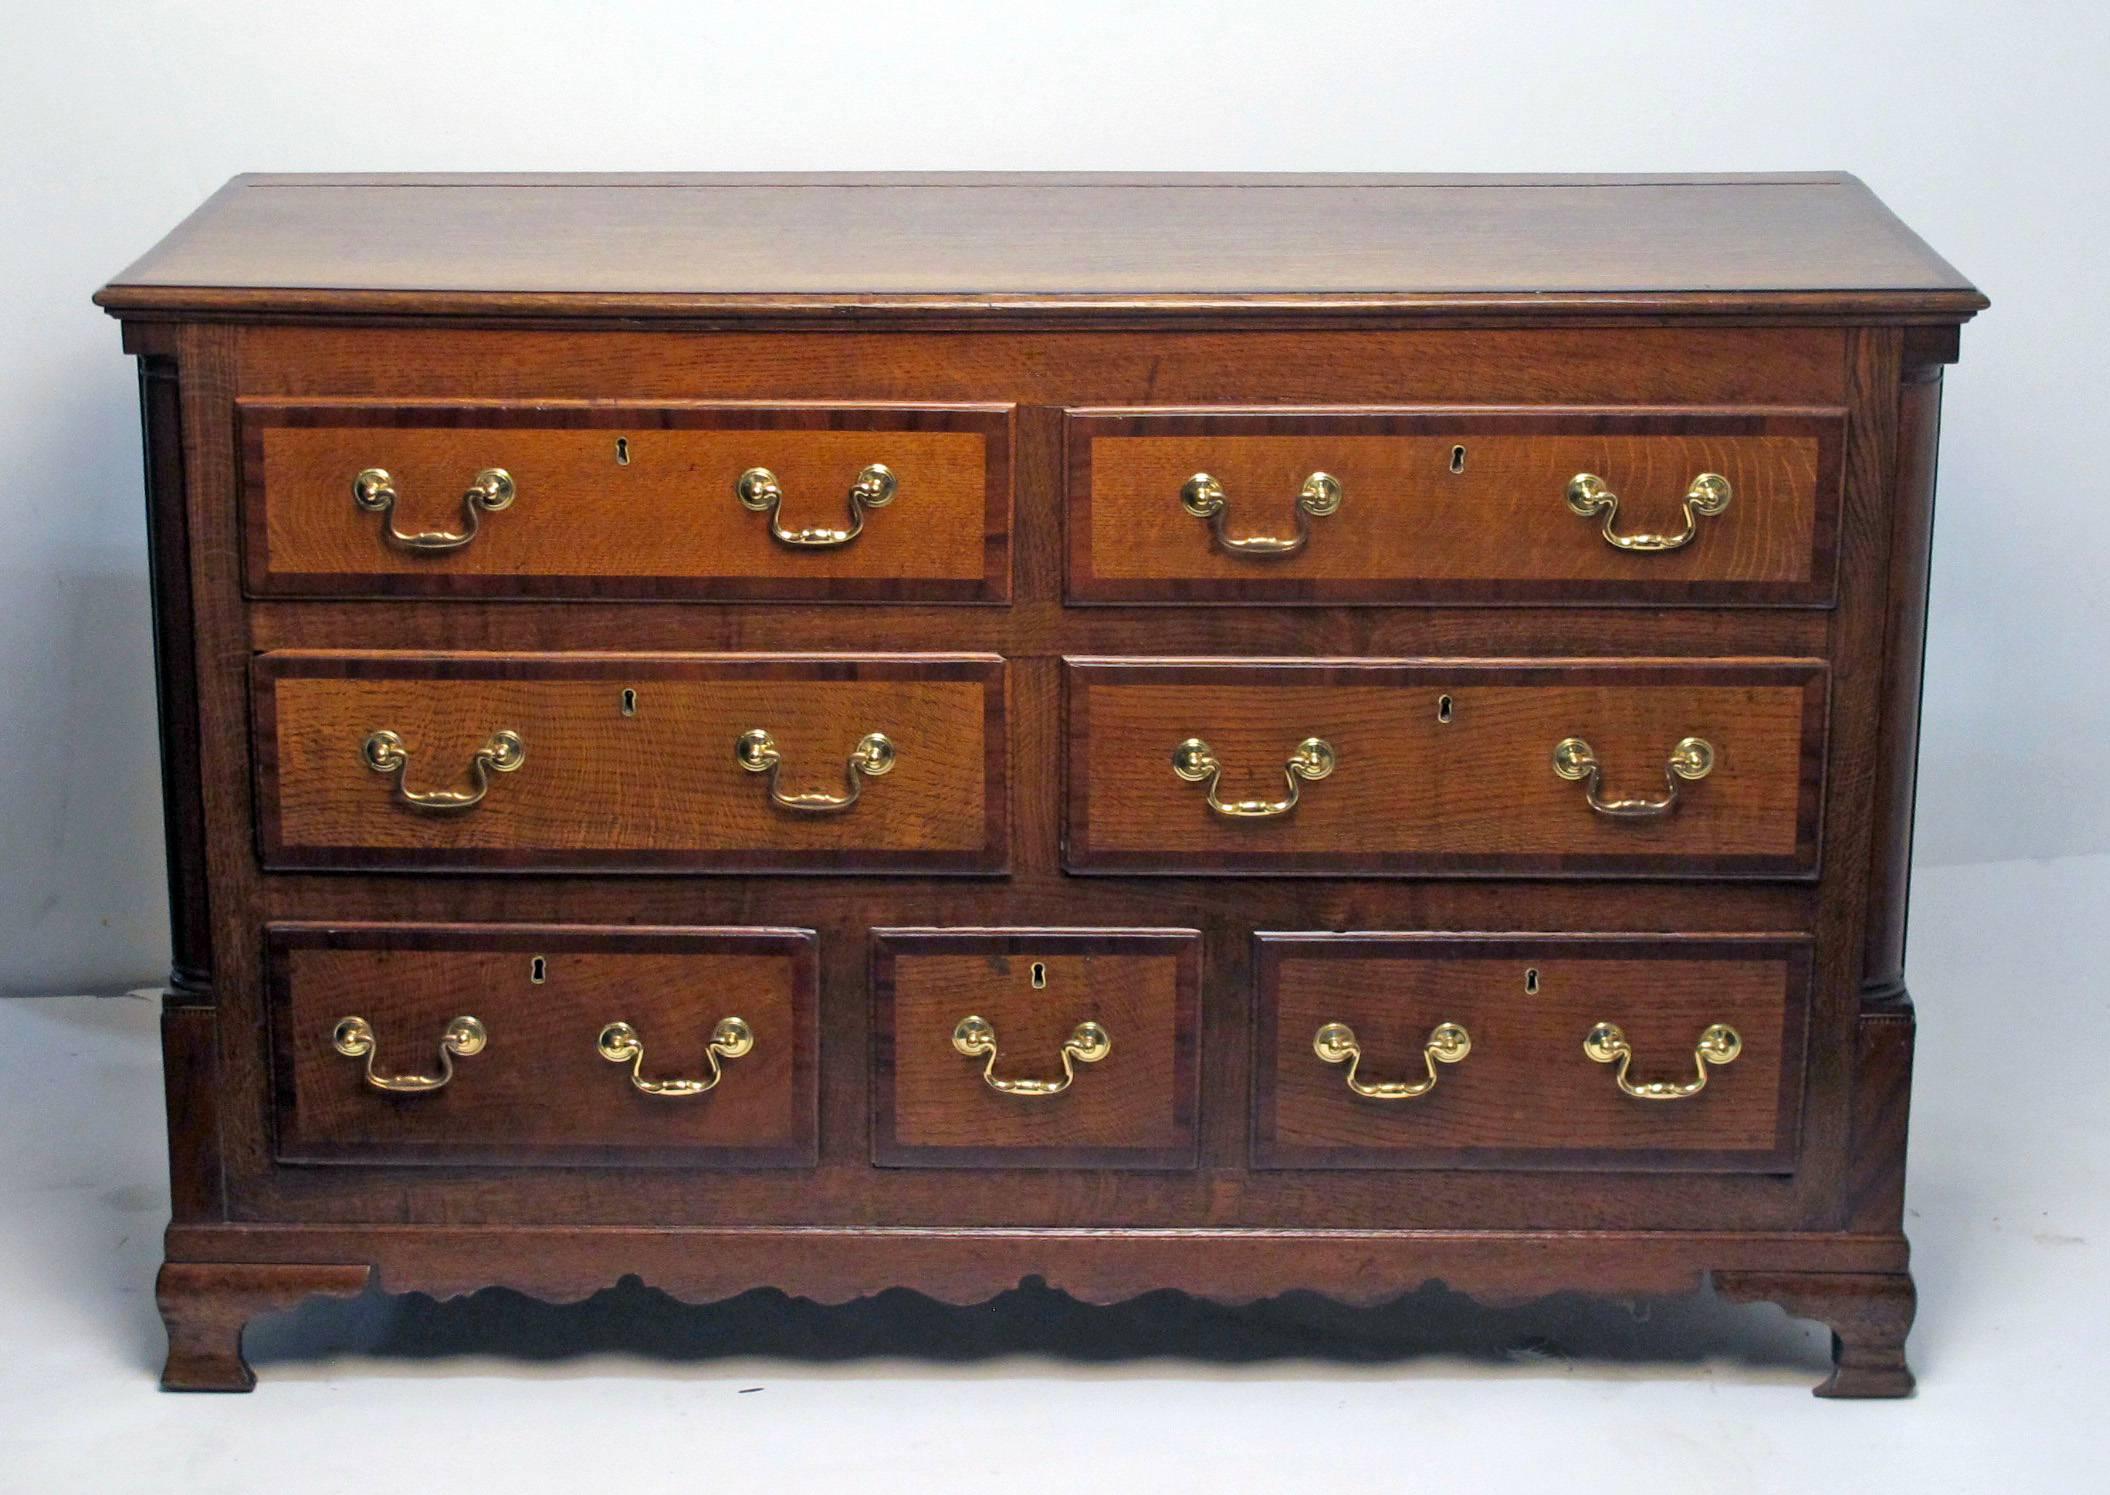 Antique English oak mule chest with mahogany trim and newer brass hardware. Altered and converted to a buffet. Recently refinished, England, mid-18th century.